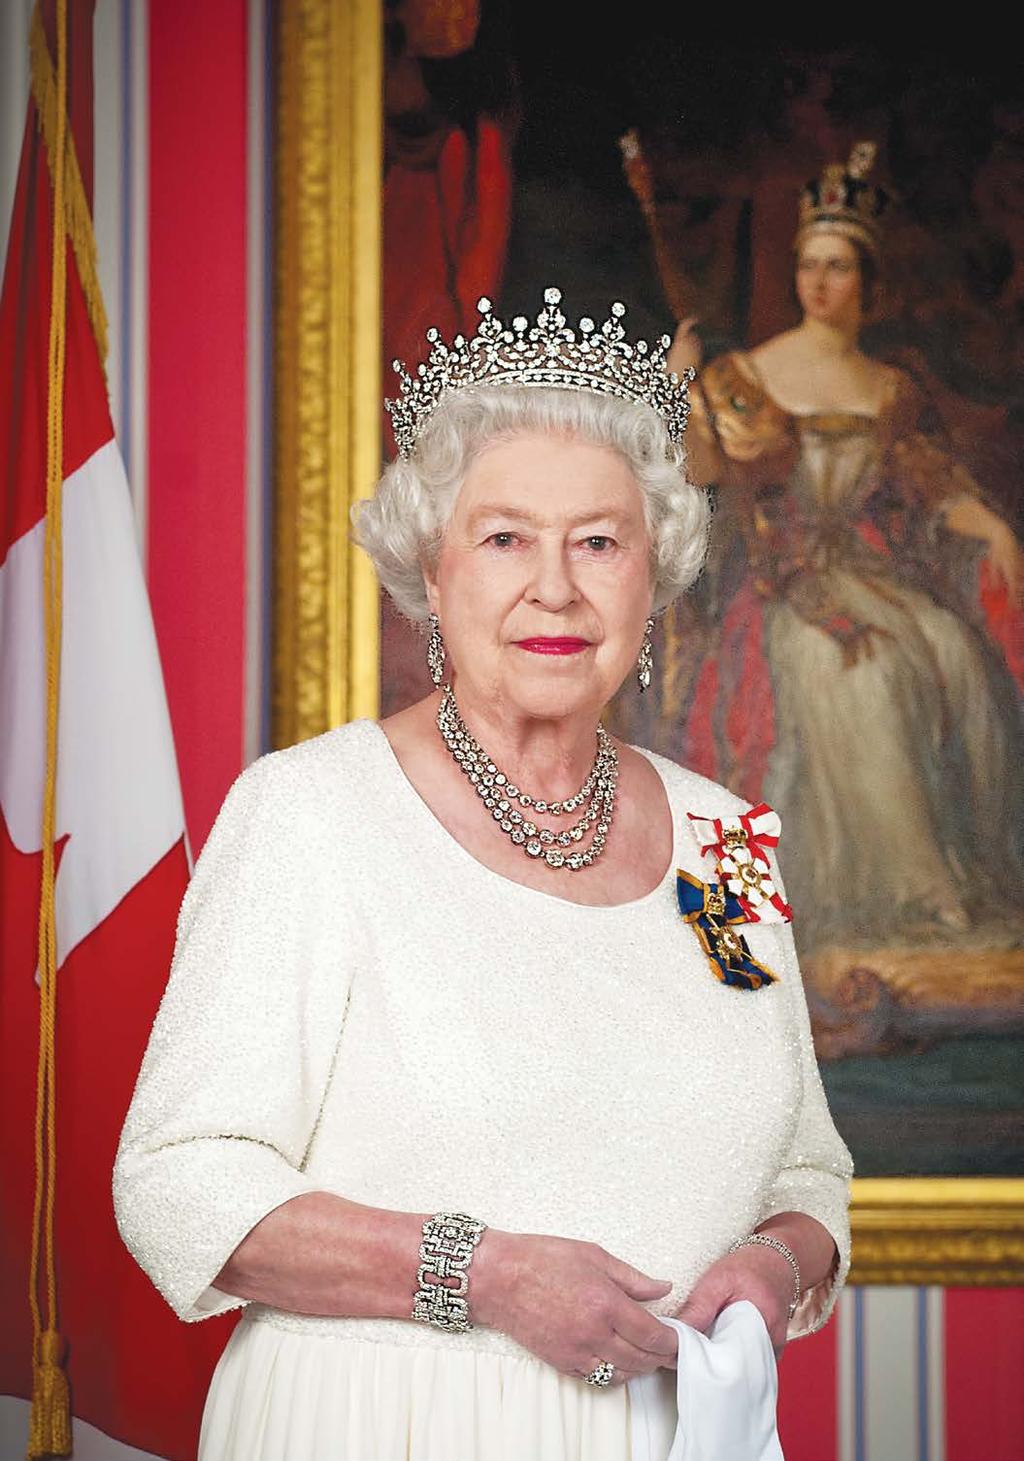 Her Majesty Queen Elizabeth II, Queen of Canada, wearing her insignia of Sovereign of the Order of Canada and of